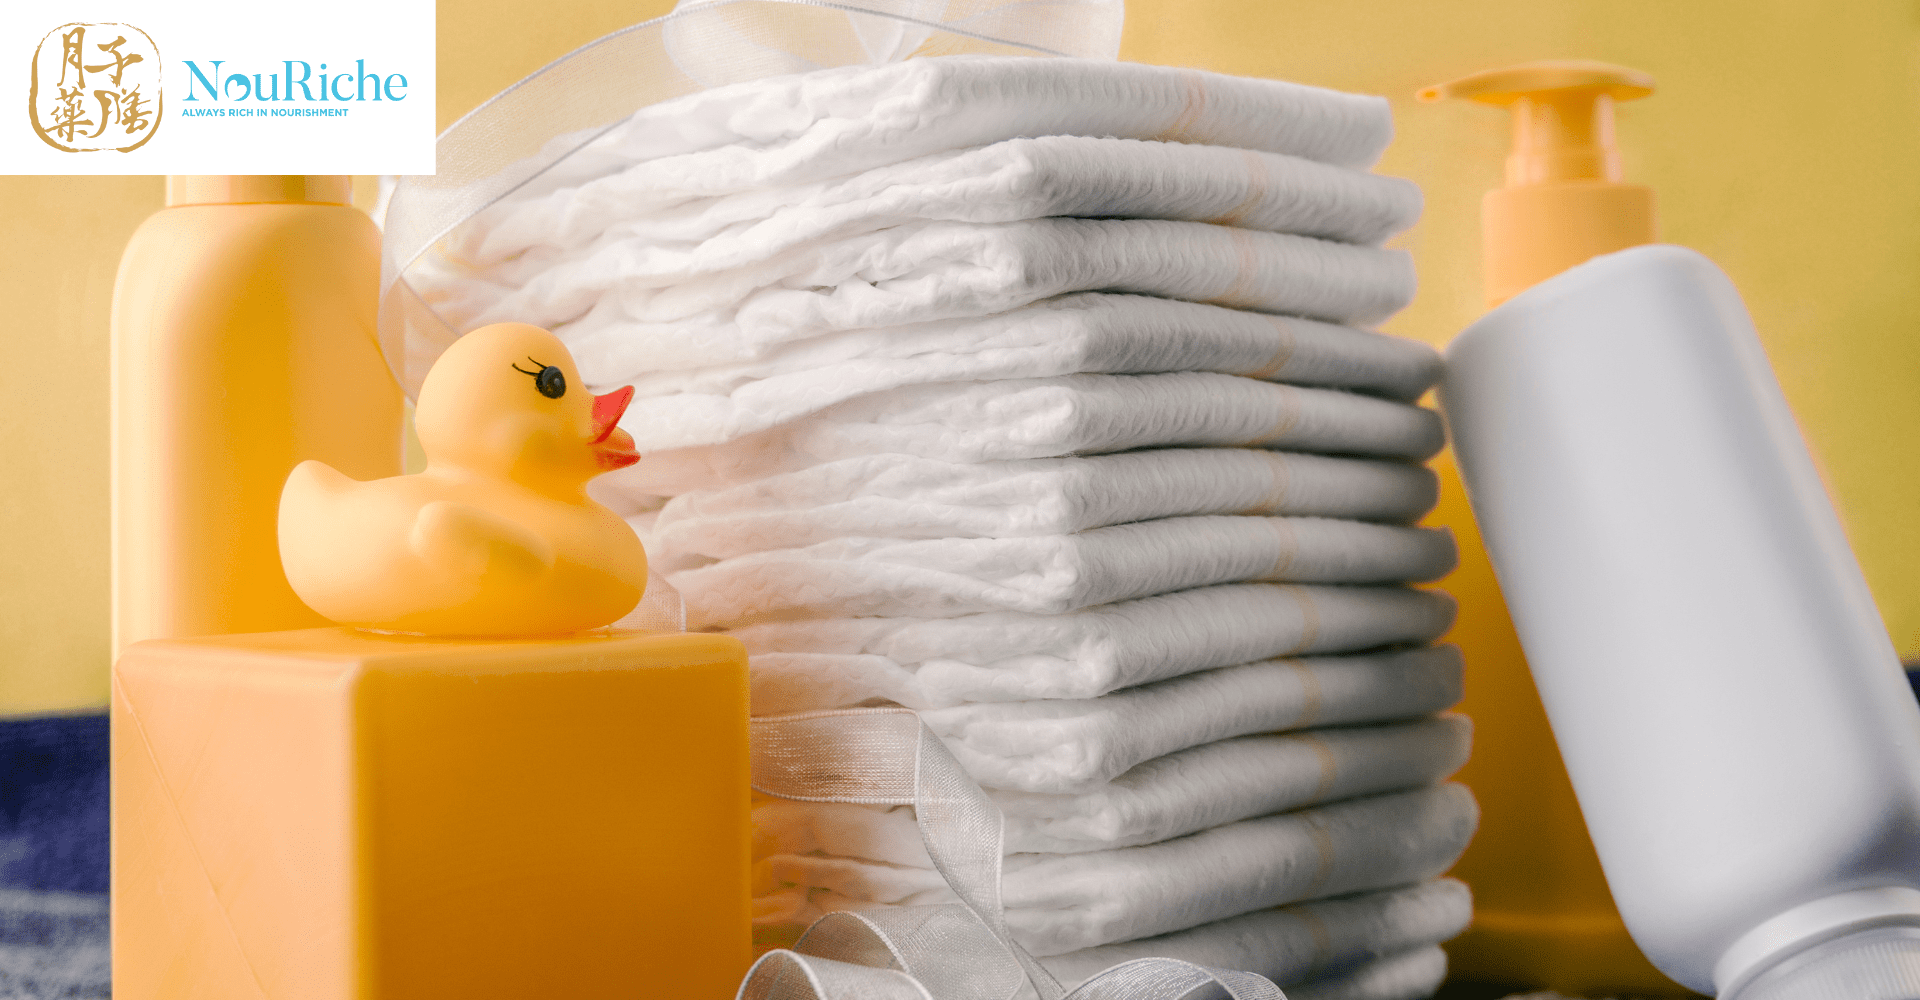 a stockpile of baby diapers neatly arranged - Confinement Tips for new moms